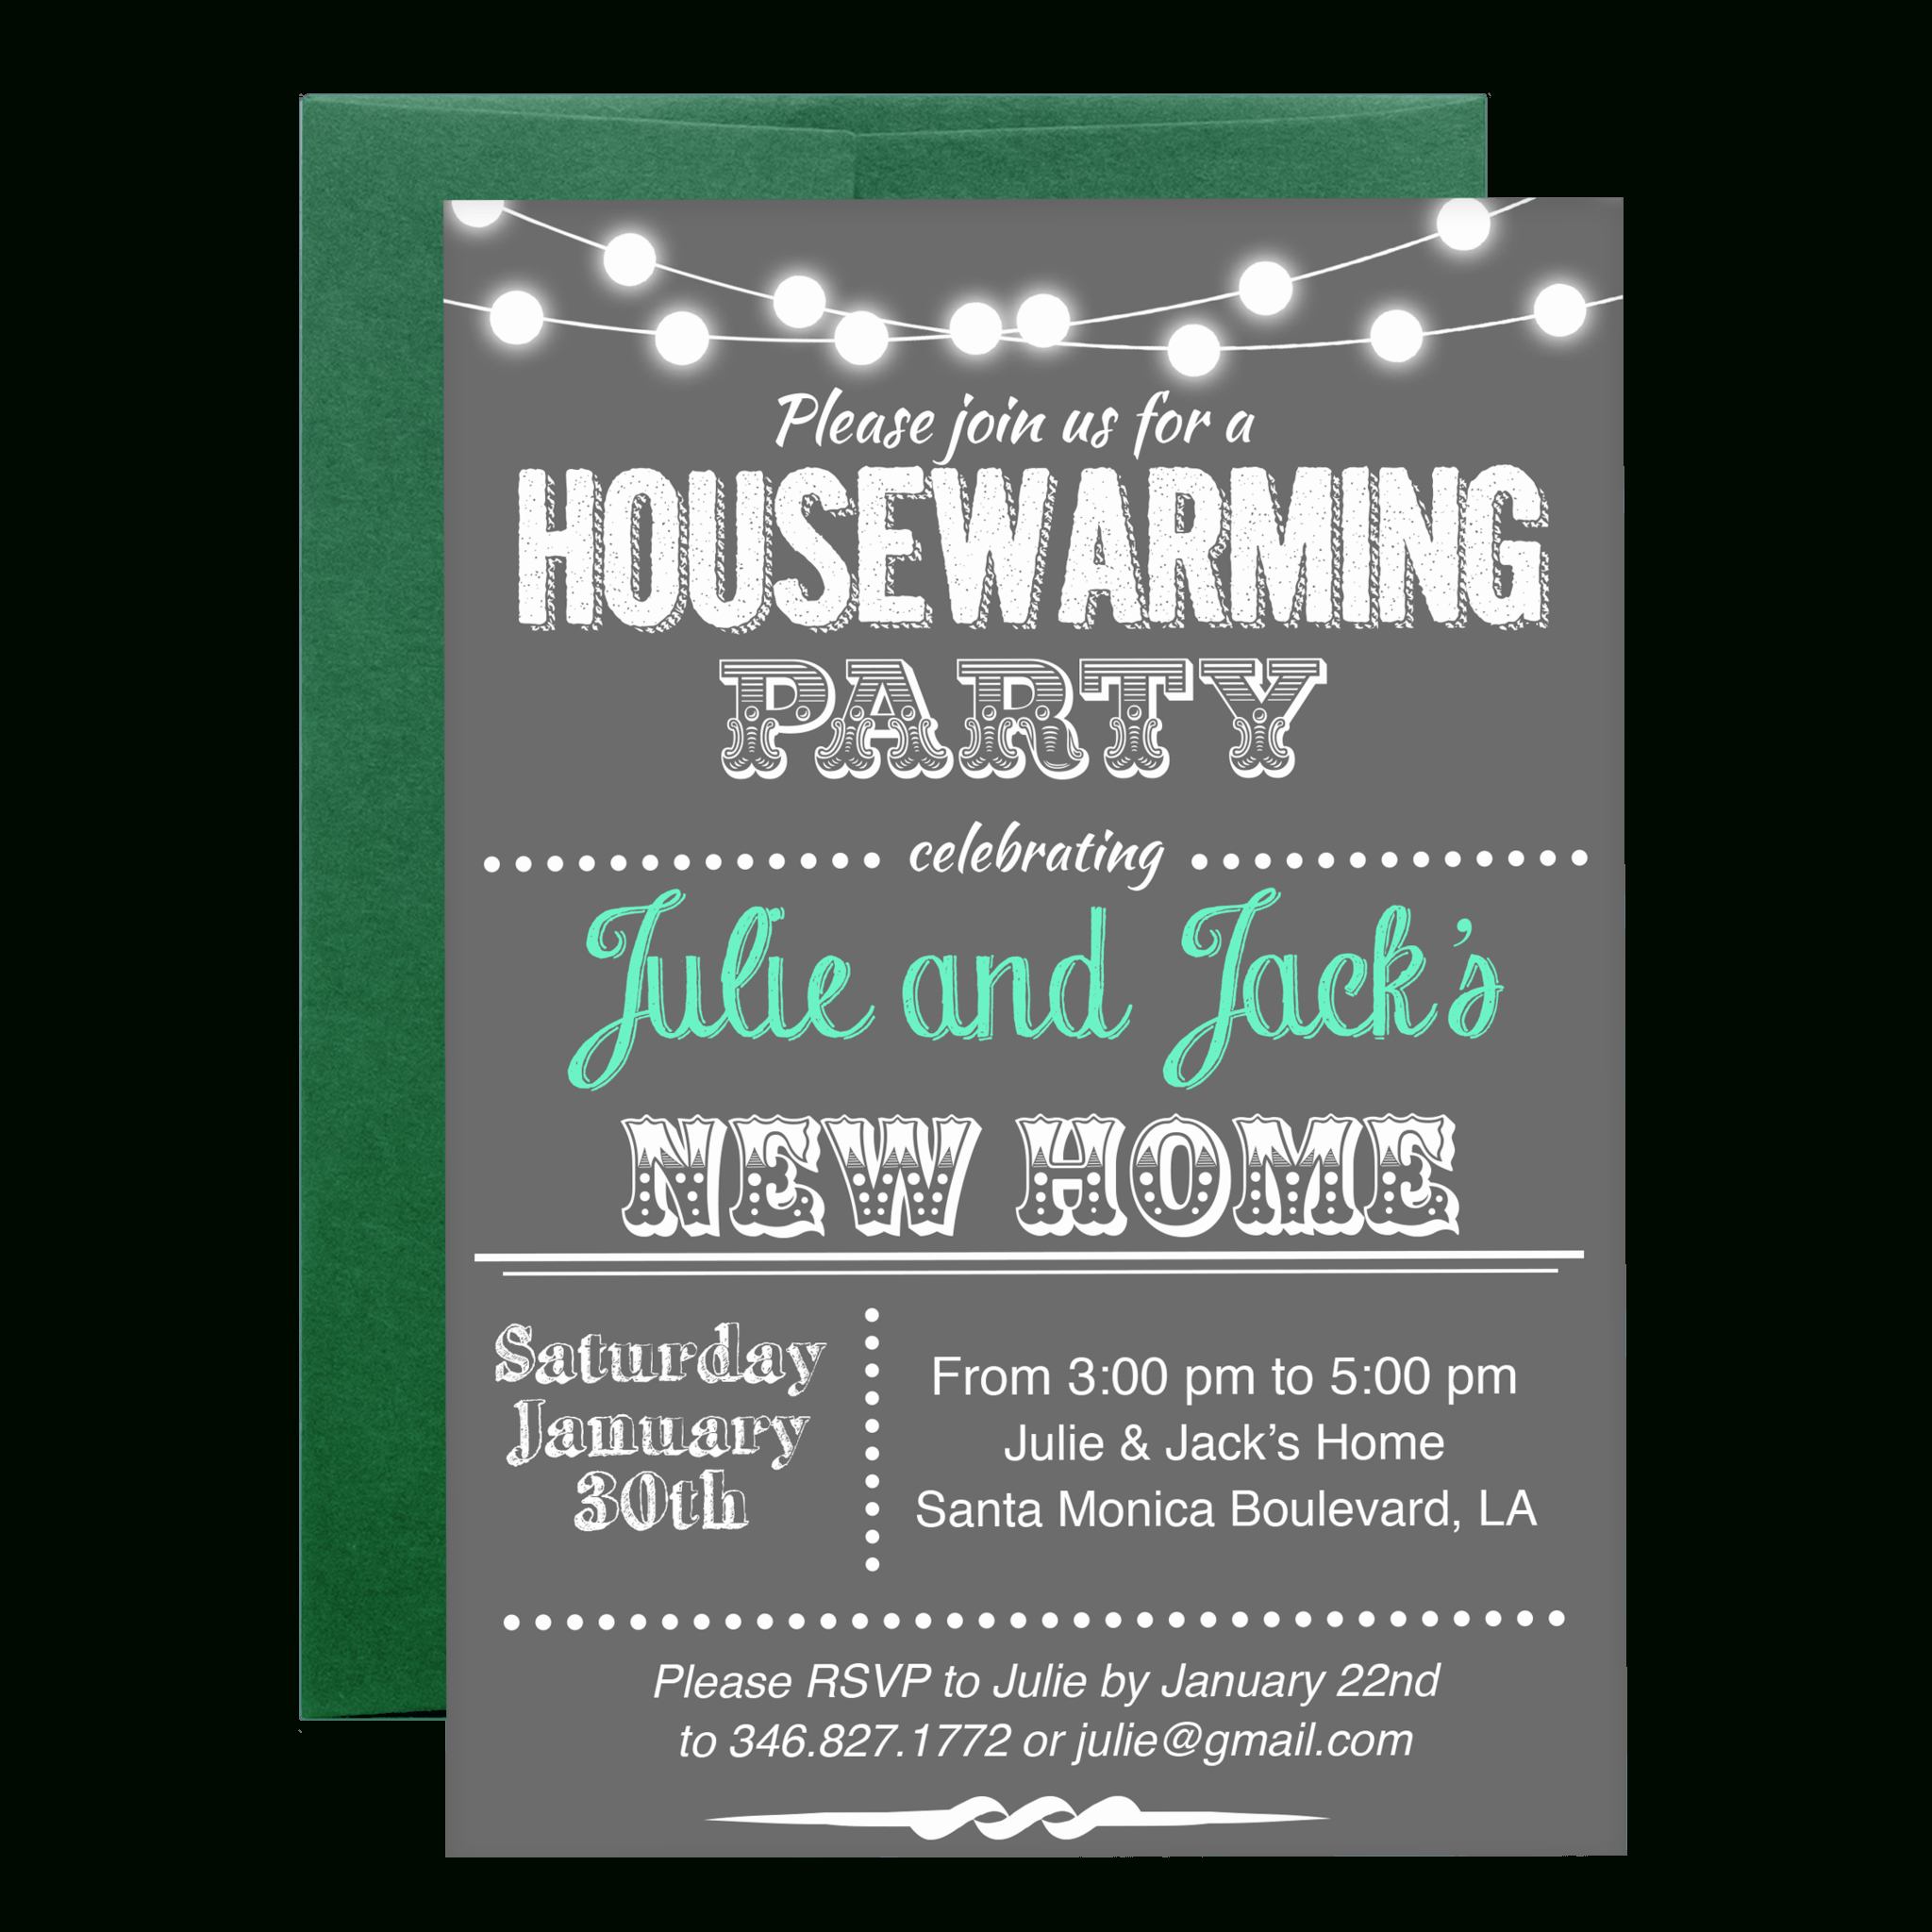 009 Housewarming Party Invitation Template Free Perfect With Free Housewarming Invitation Card Template